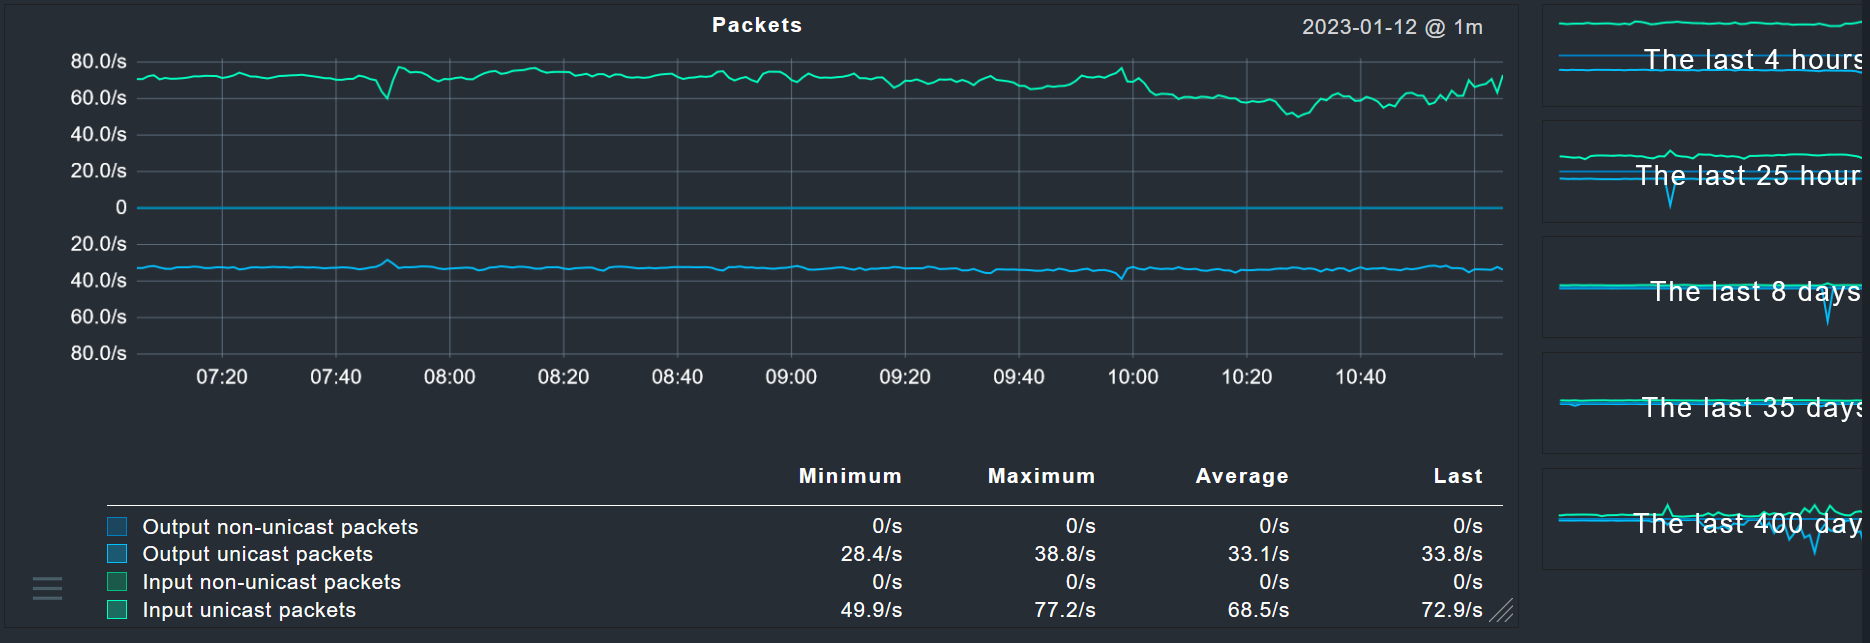 Packets traffic on a wlan interface